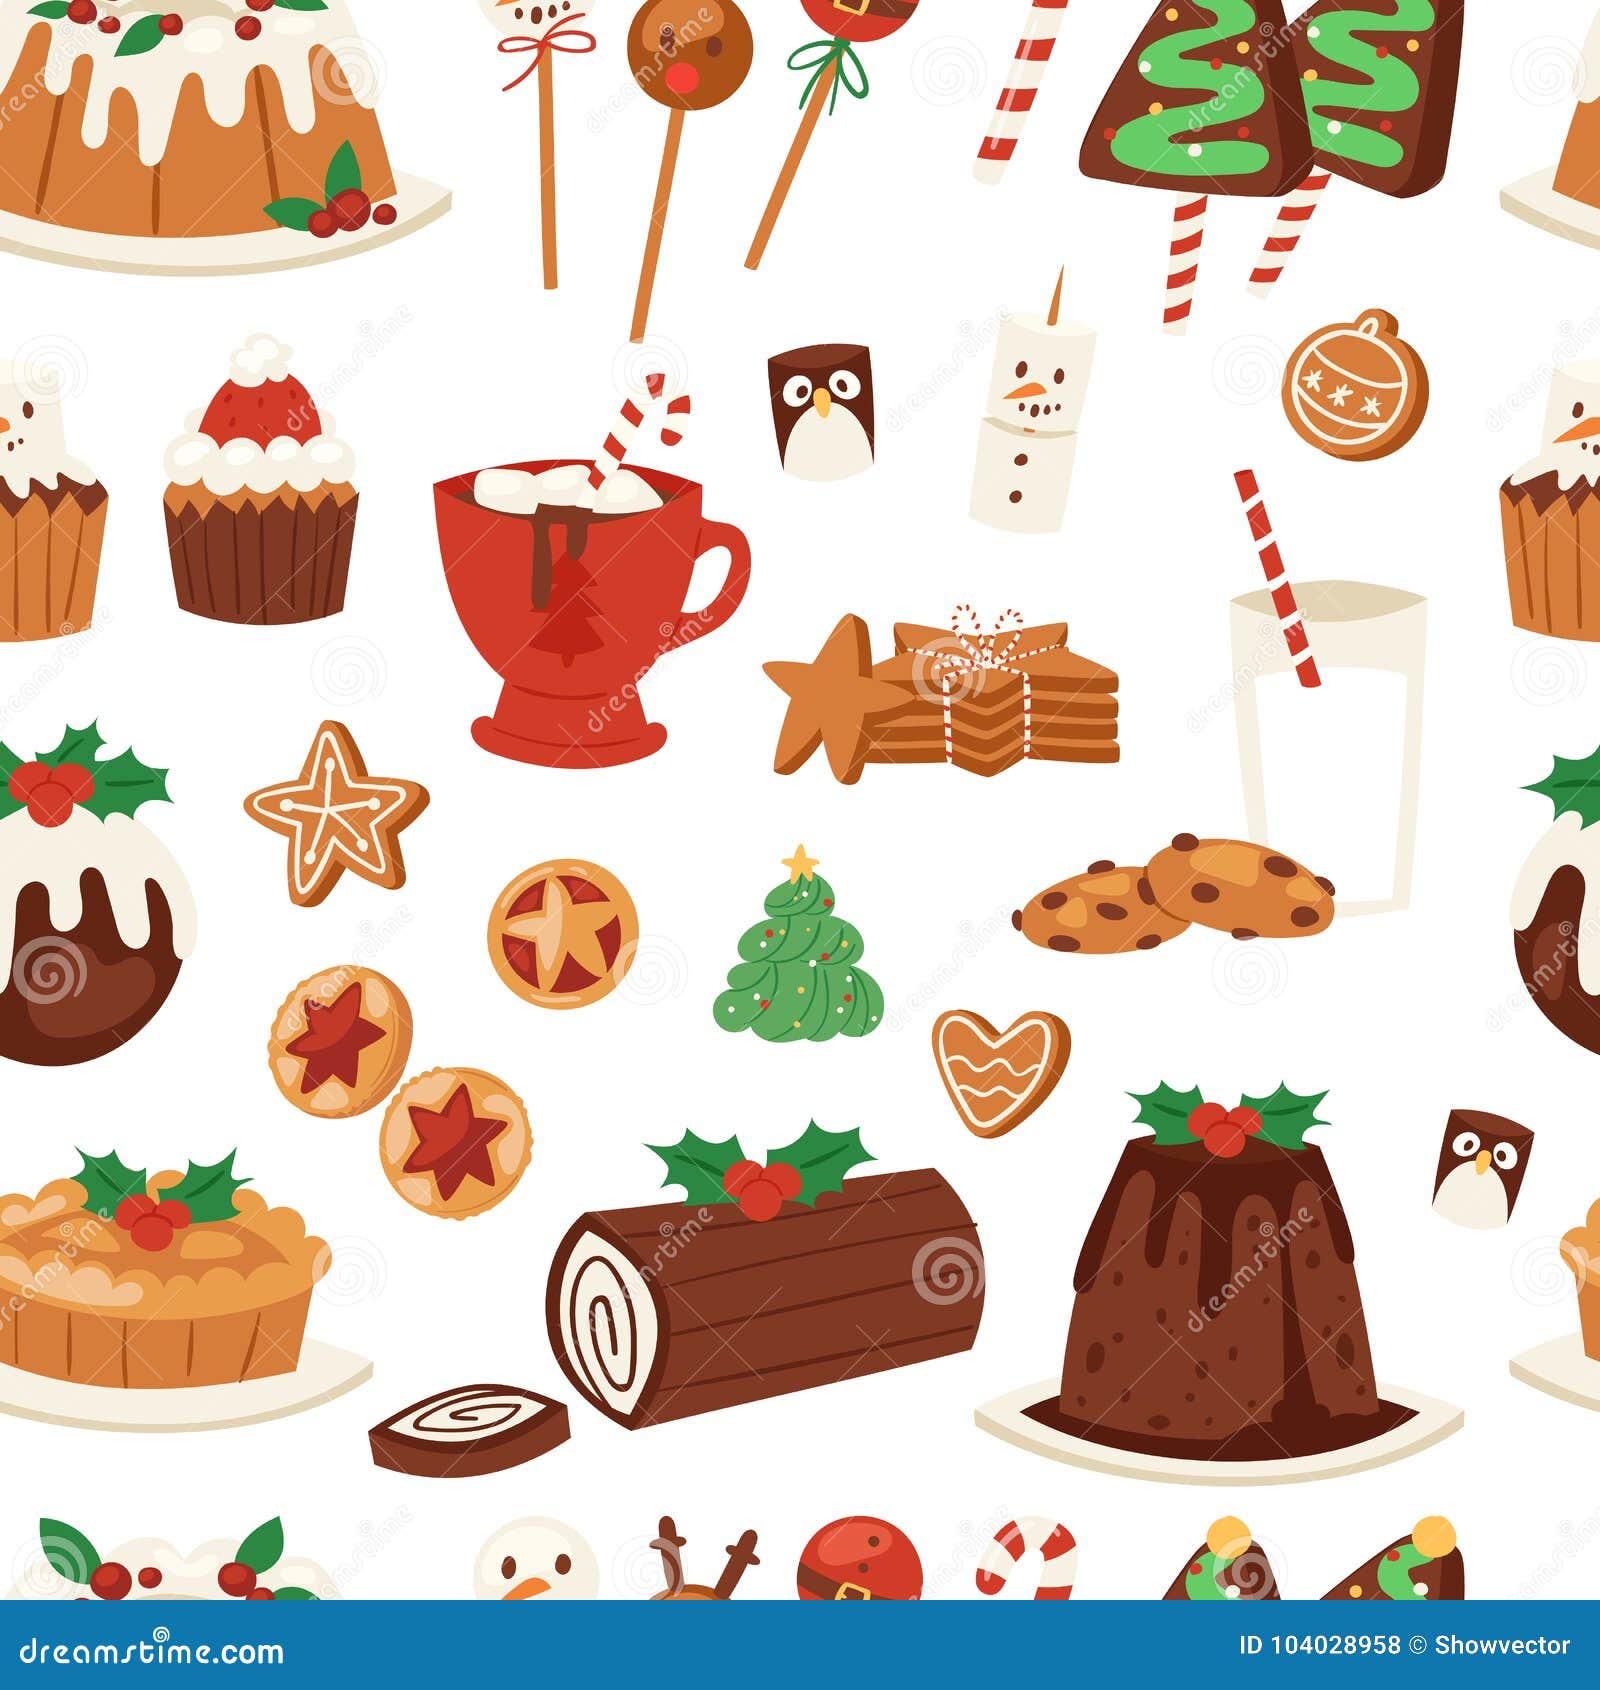 Christmas Food Vector Desserts Holiday Decoration Xmas Family Diner ...